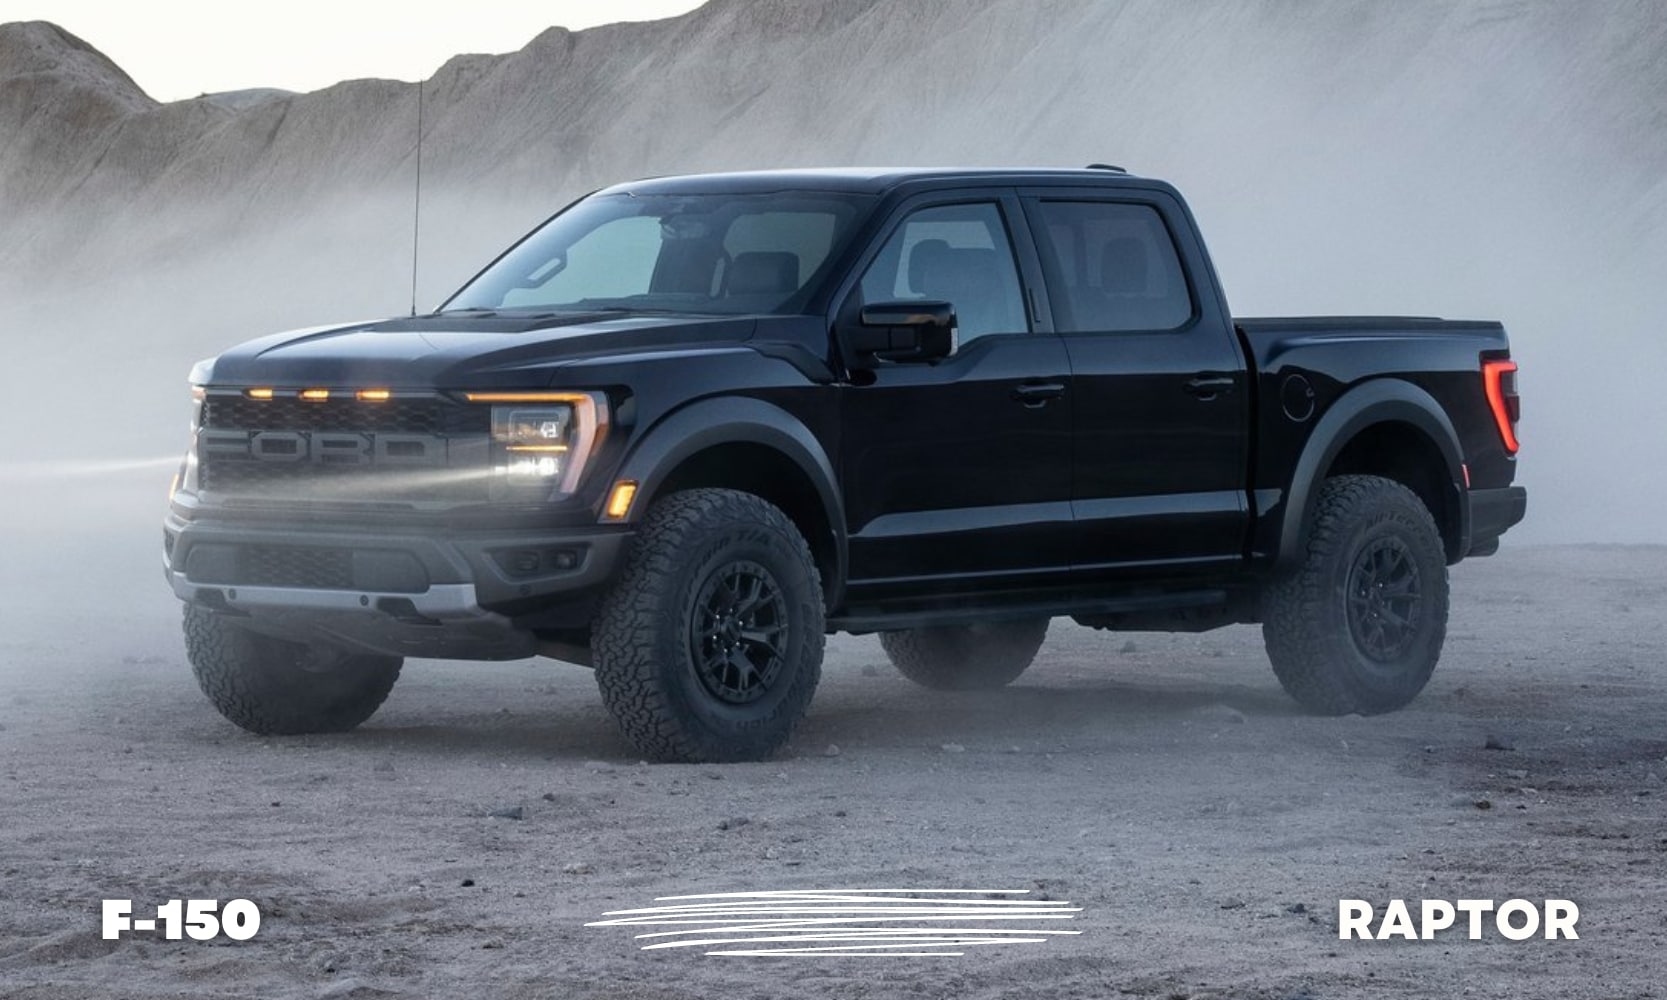 a black used Ford F-150 Raptor truck parked in some sandy off-road terrain with headlight beams shining through the dust as it settles